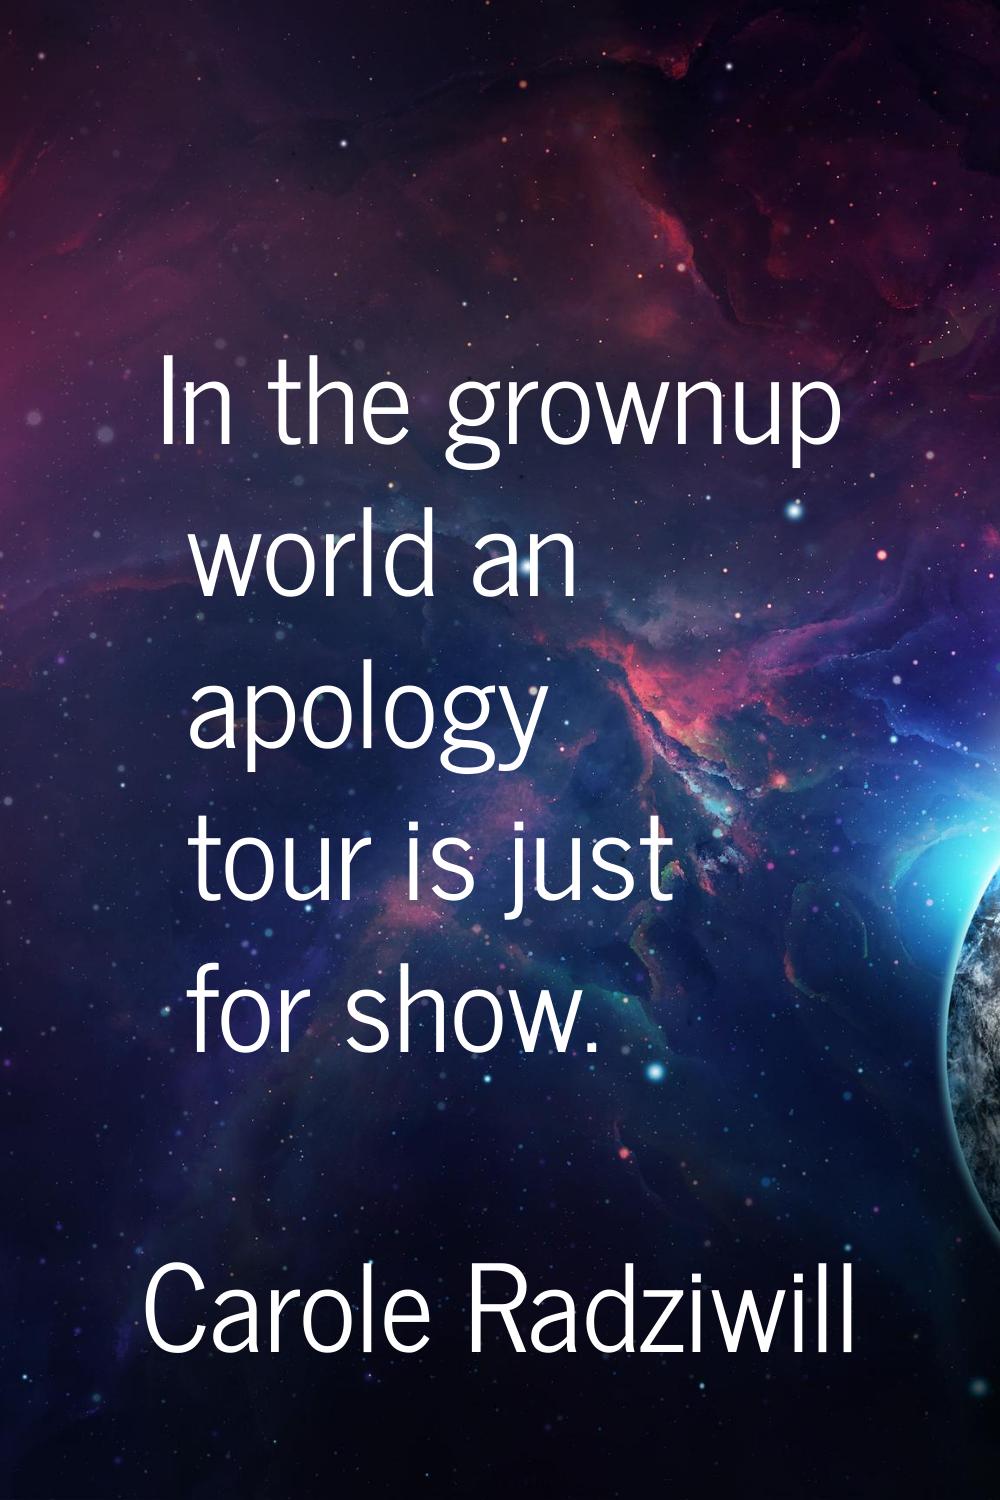 In the grownup world an apology tour is just for show.